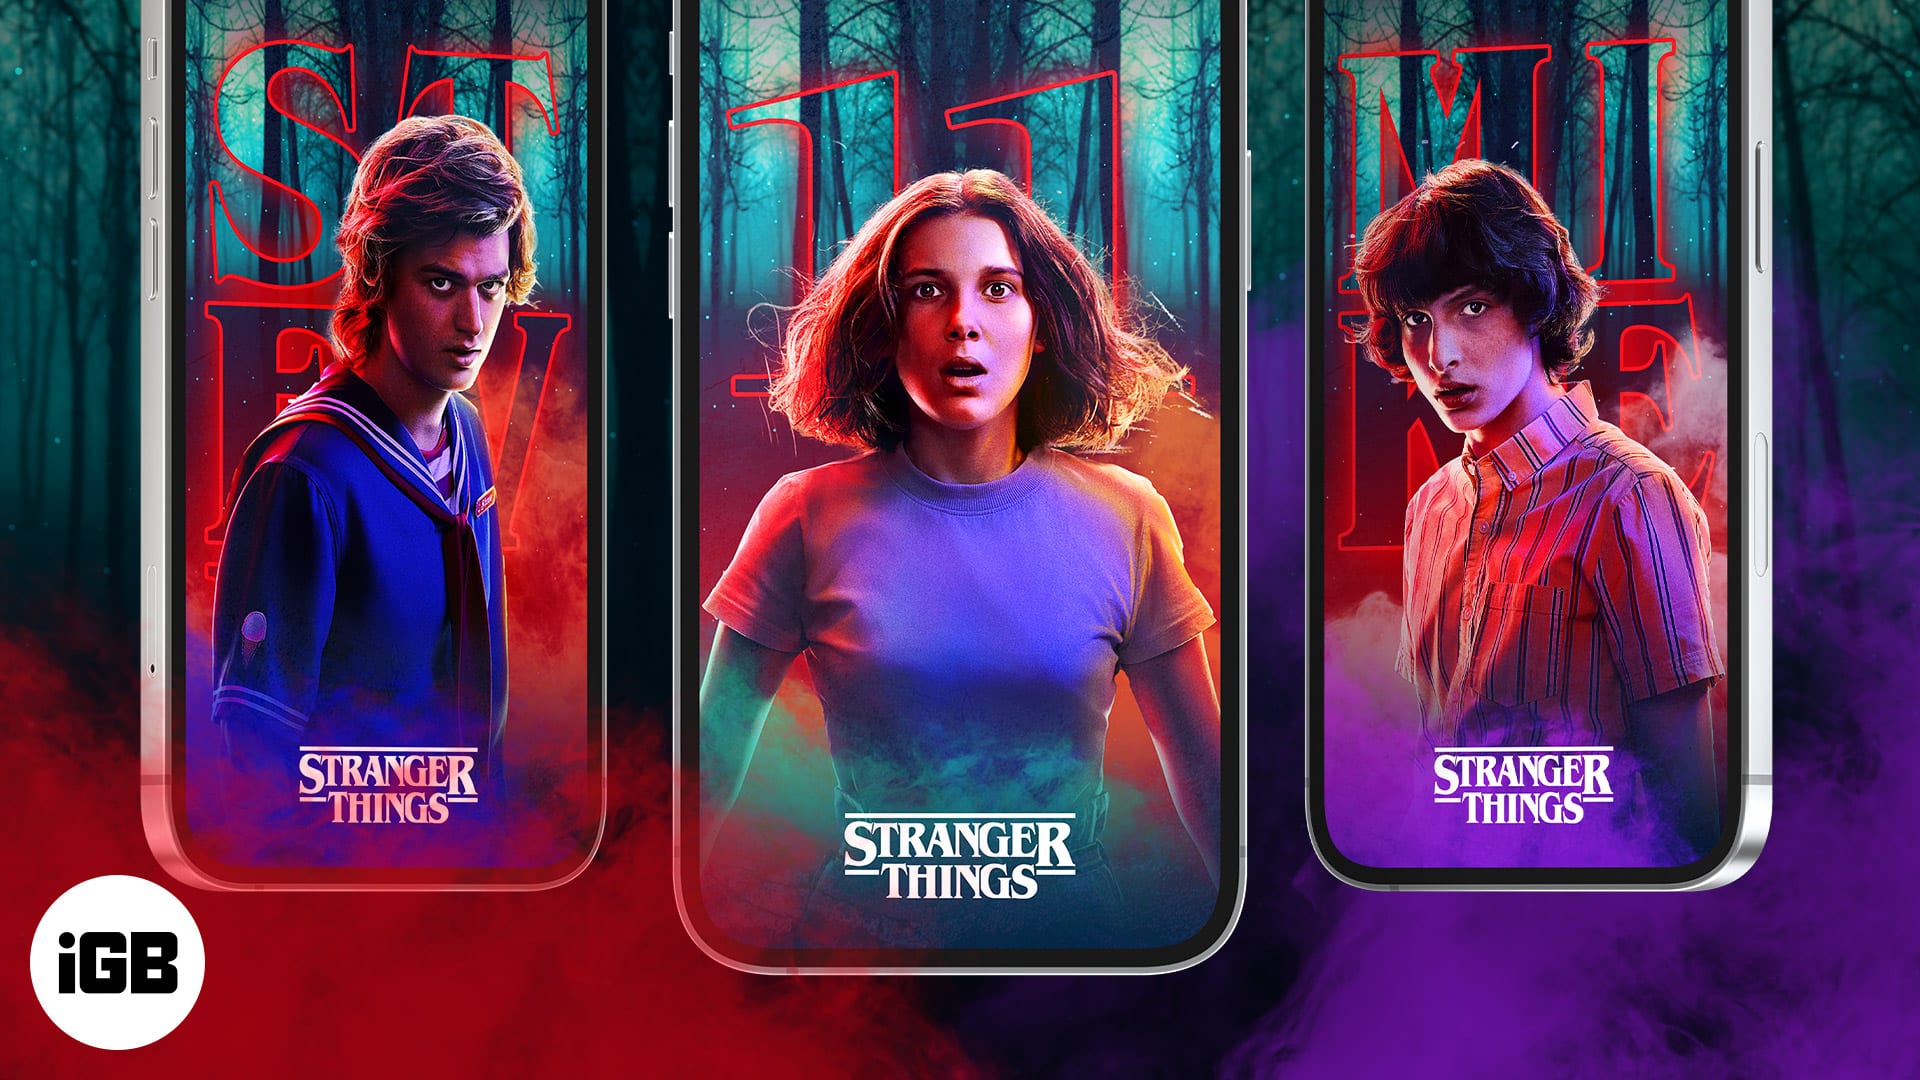 Eleven Stranger Things wallpapers for iPhone in 2023 - iGeeksBlog